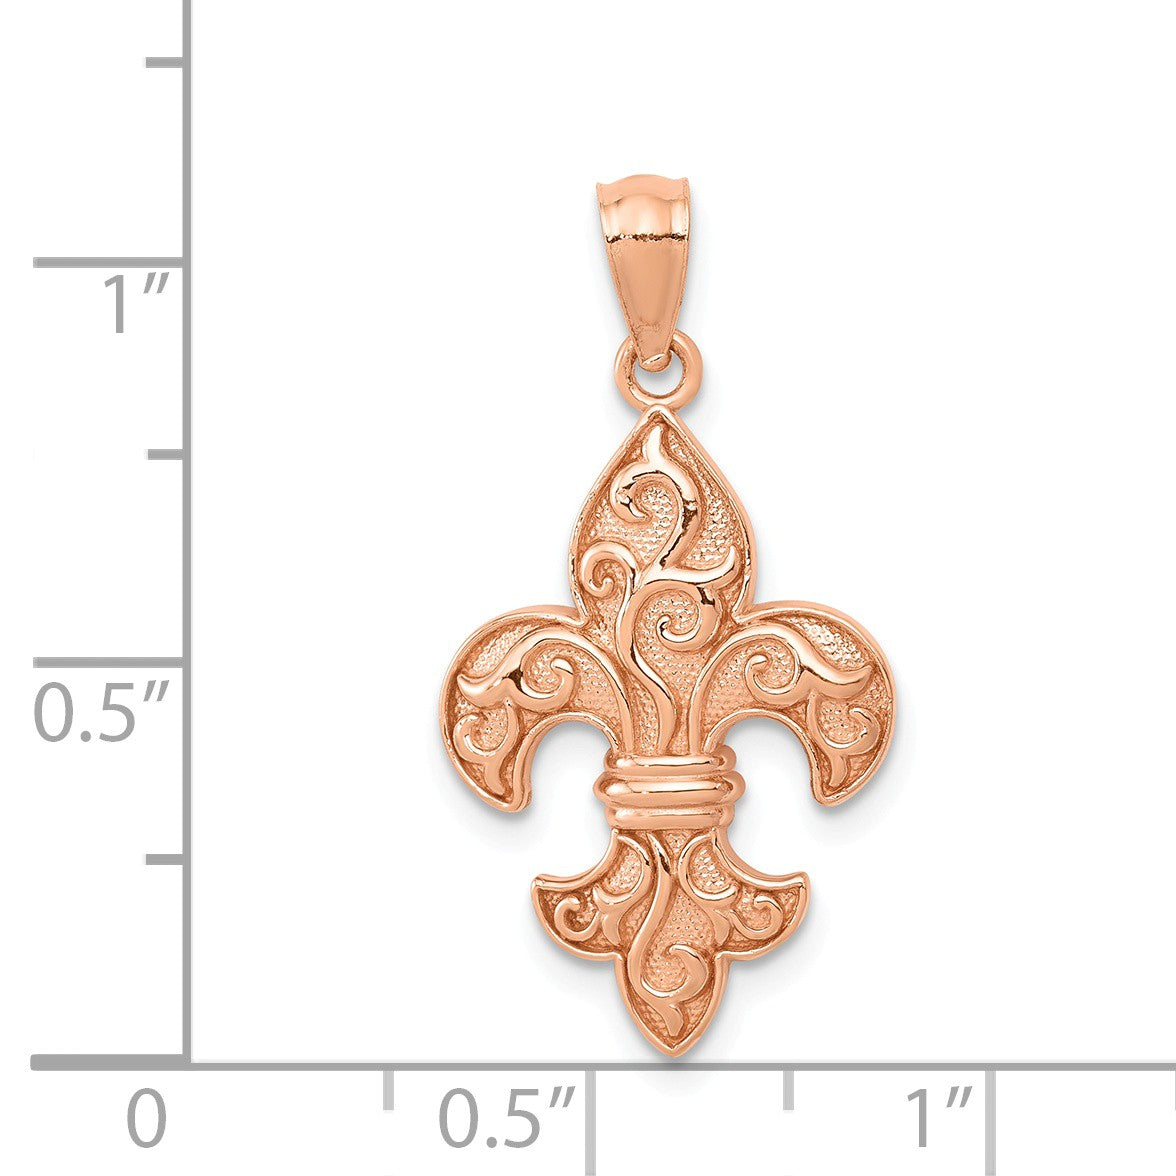 Alternate view of the 14k Rose Gold Fleur De Lis Pendant, 14mm (9/16 inch) by The Black Bow Jewelry Co.